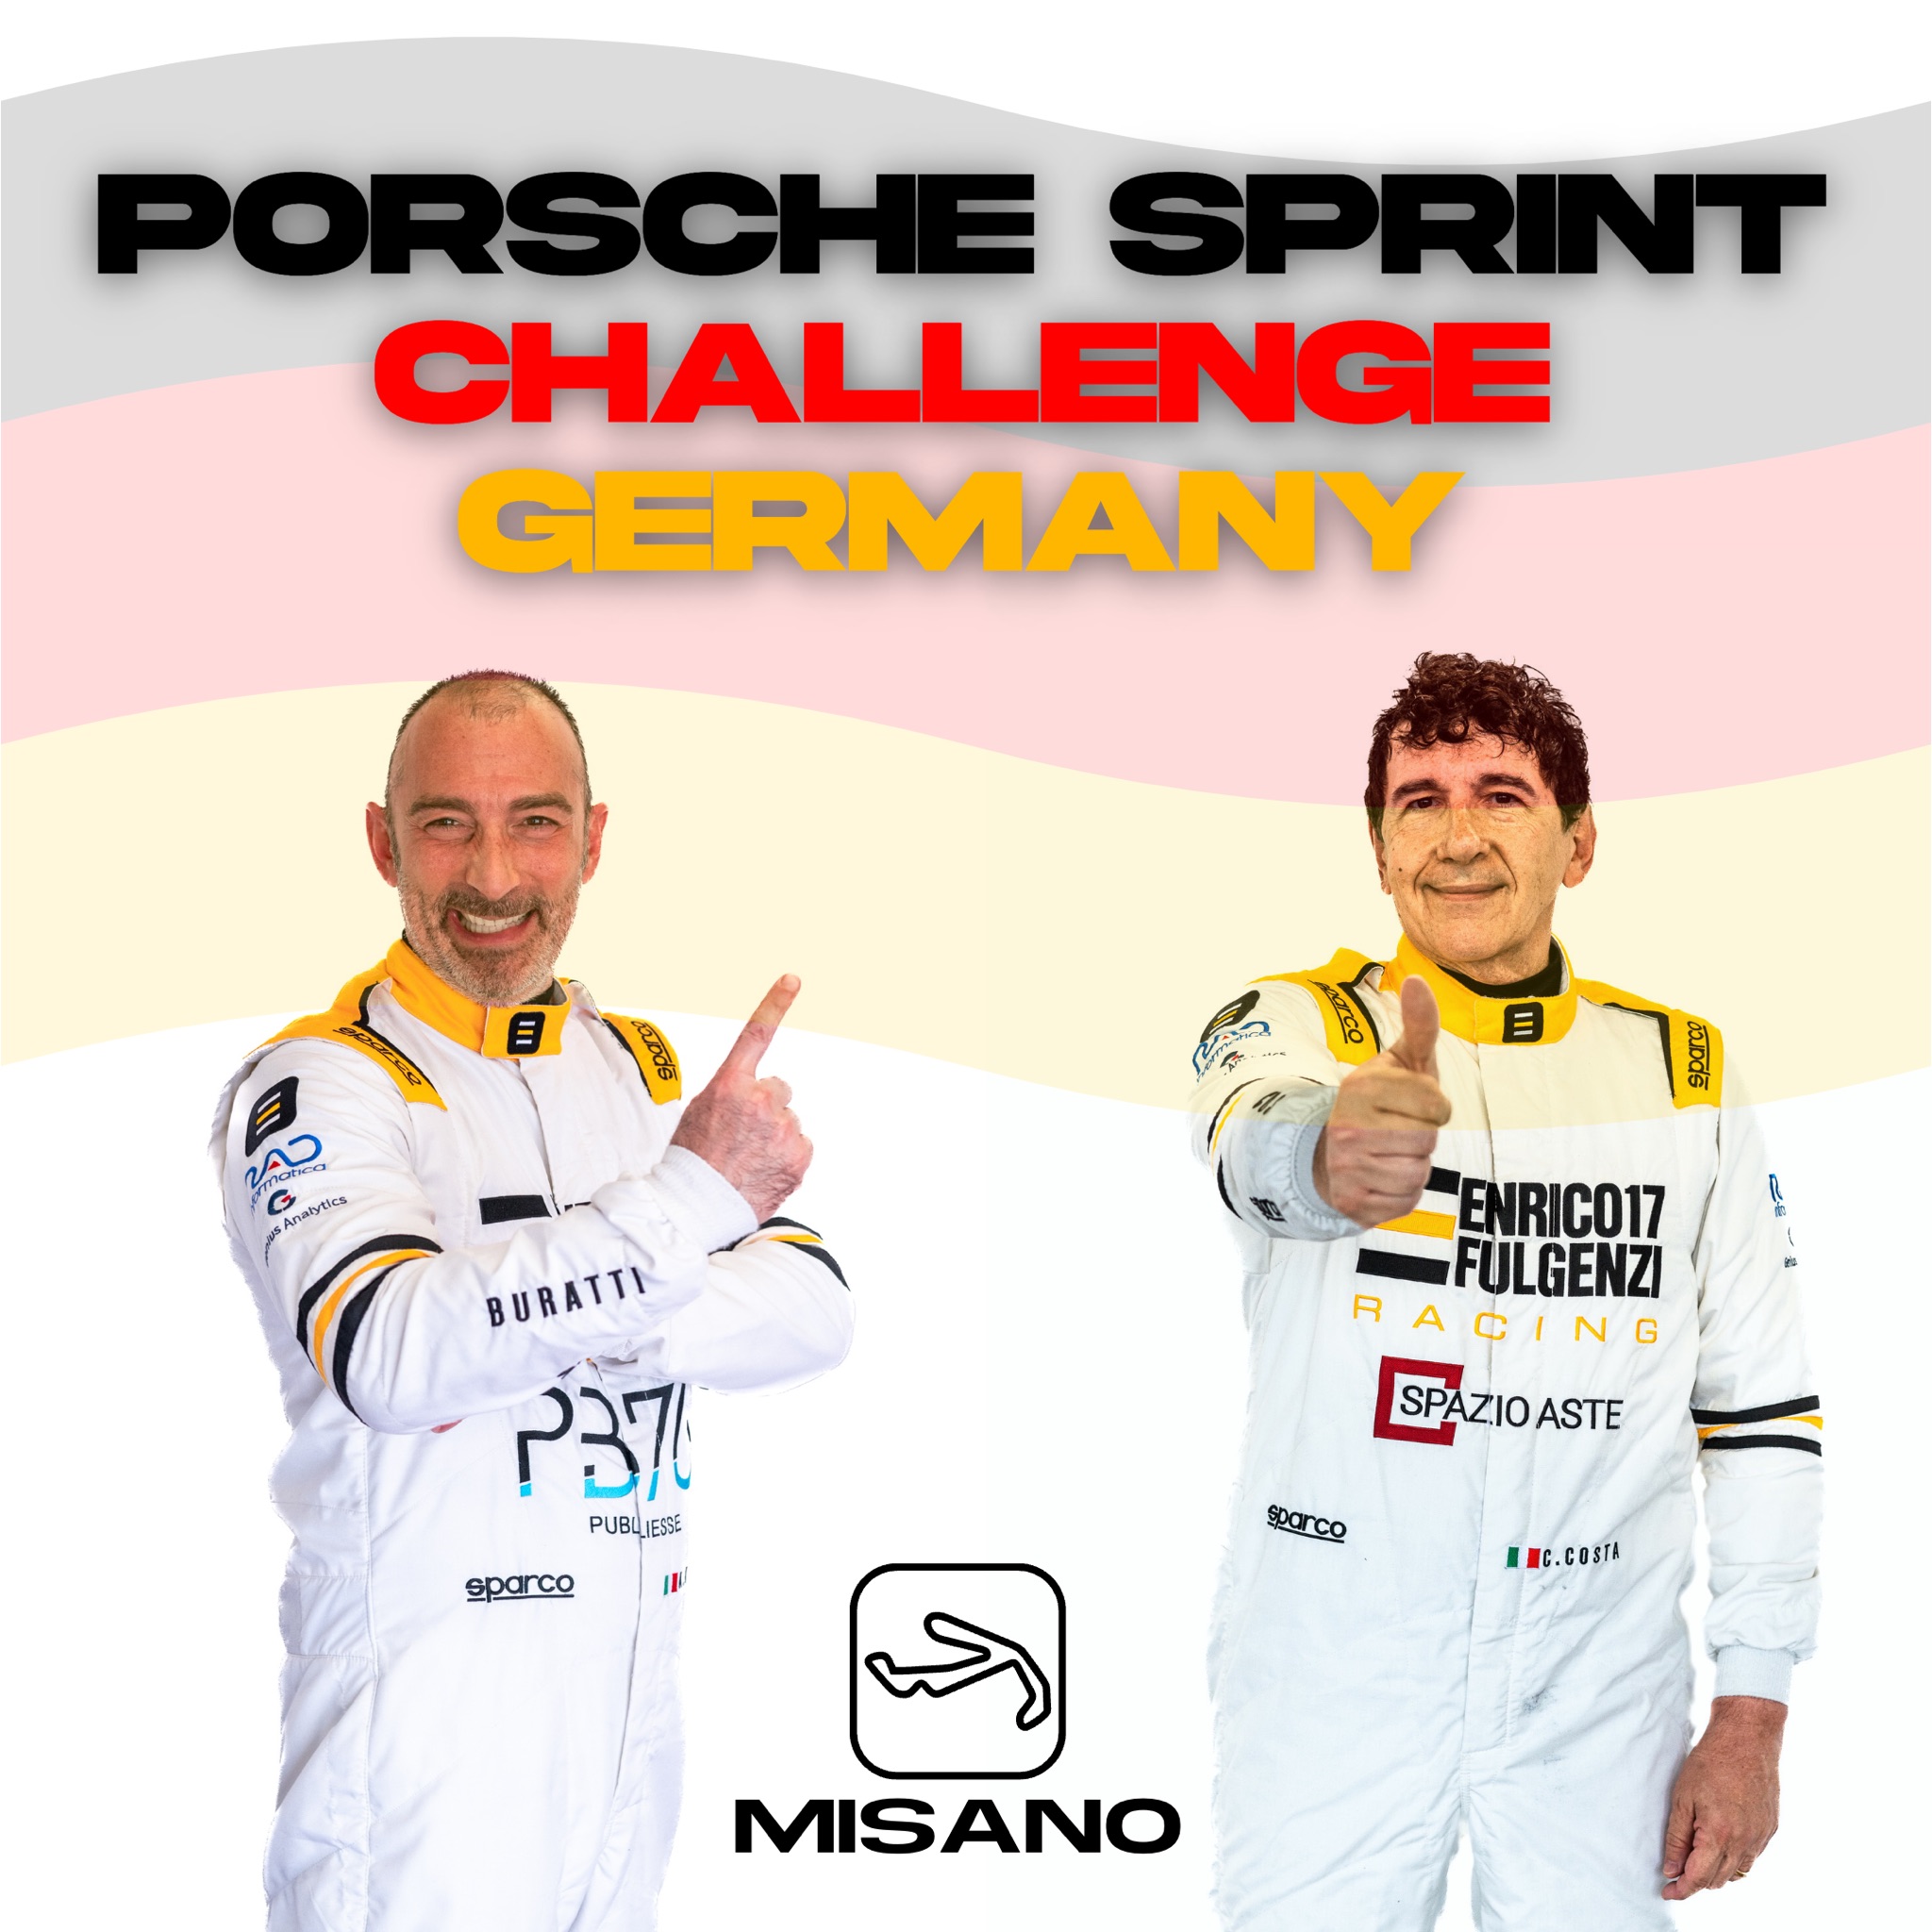 The Enrico Fulgenzi Racing team ready for the challenge in the Porsche Sprint Challenge Germany